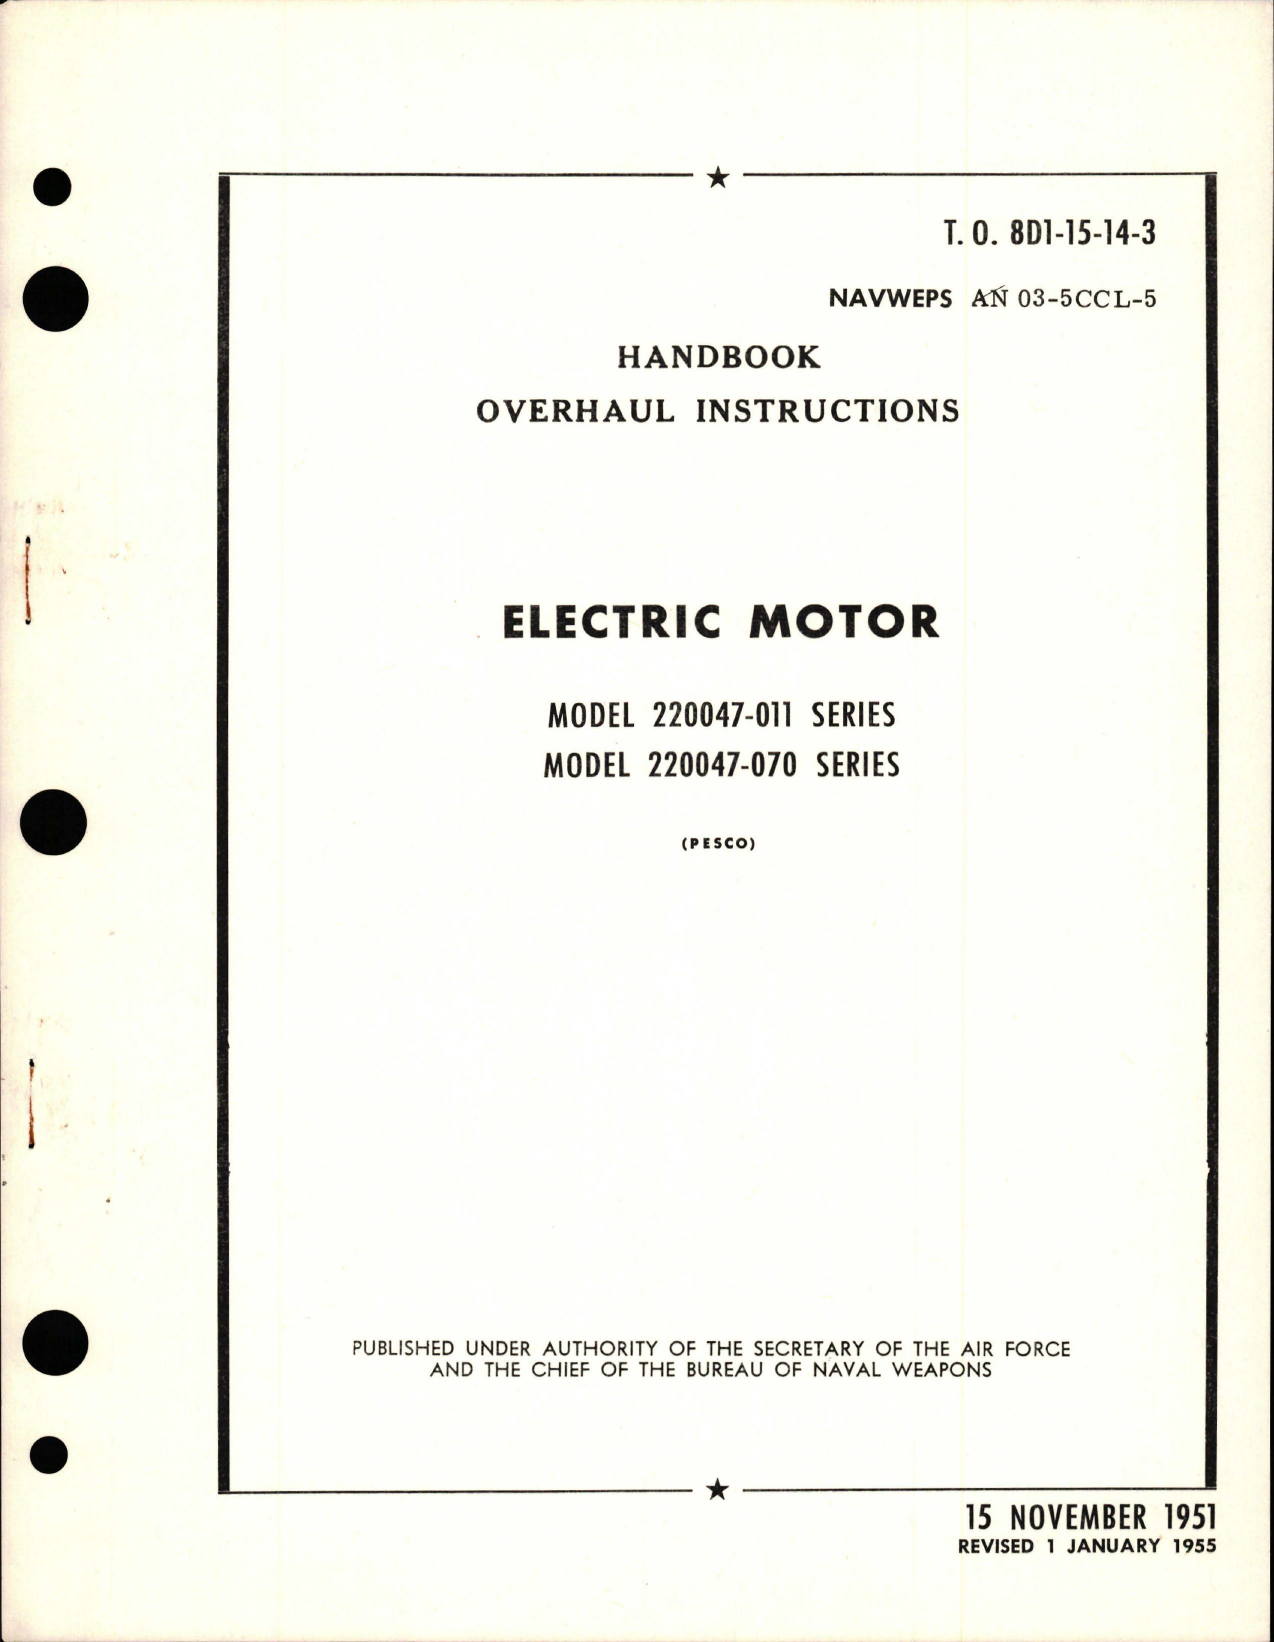 Sample page 1 from AirCorps Library document: Overhaul Instructions for Electric Motor - Models 220047-011 and 220047-070